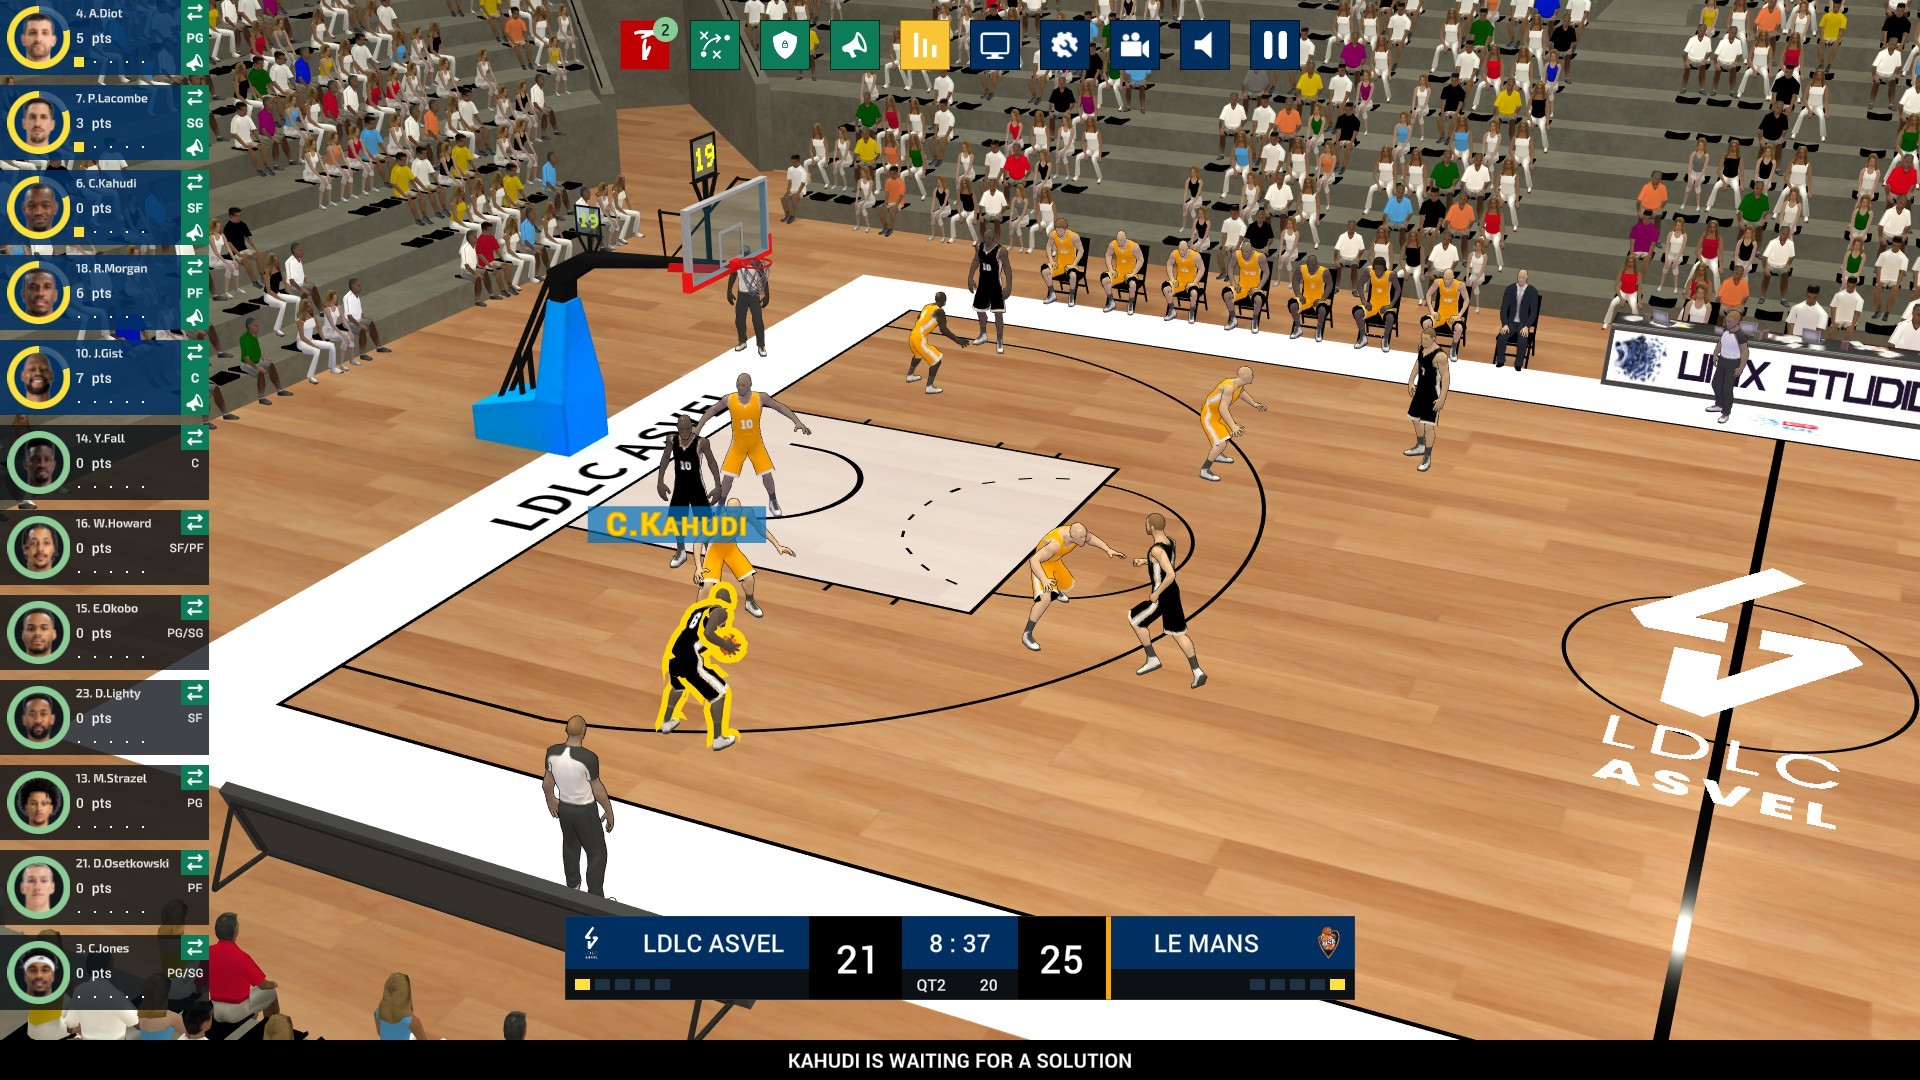 [$ 5.59] Pro Basketball Manager 2022 Steam CD key